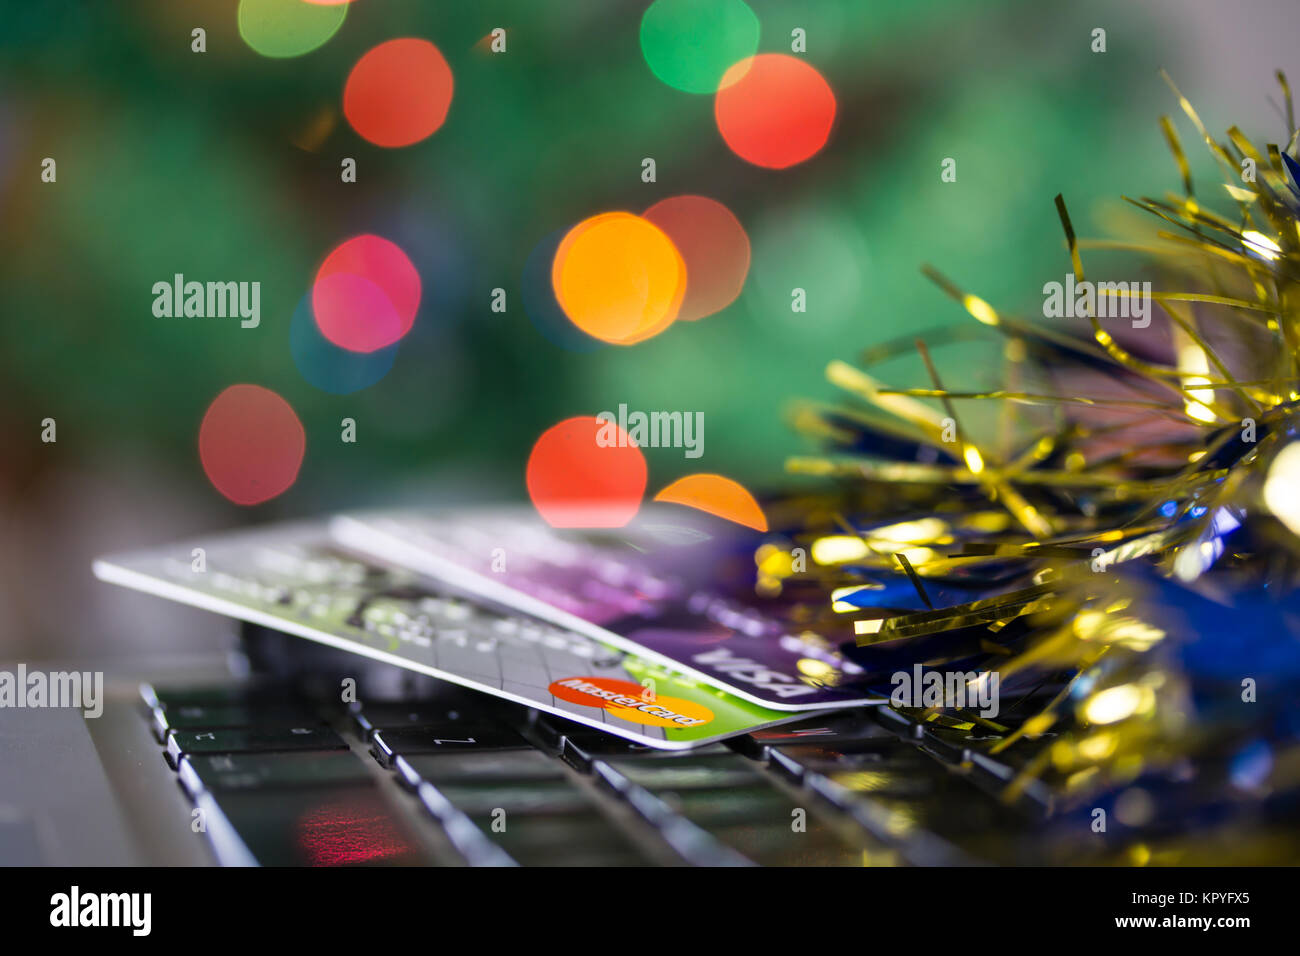 Concept image of spending at Christmas featuring credit/debit cards on a computer keyboard.Christmas tree lights in background Stock Photo